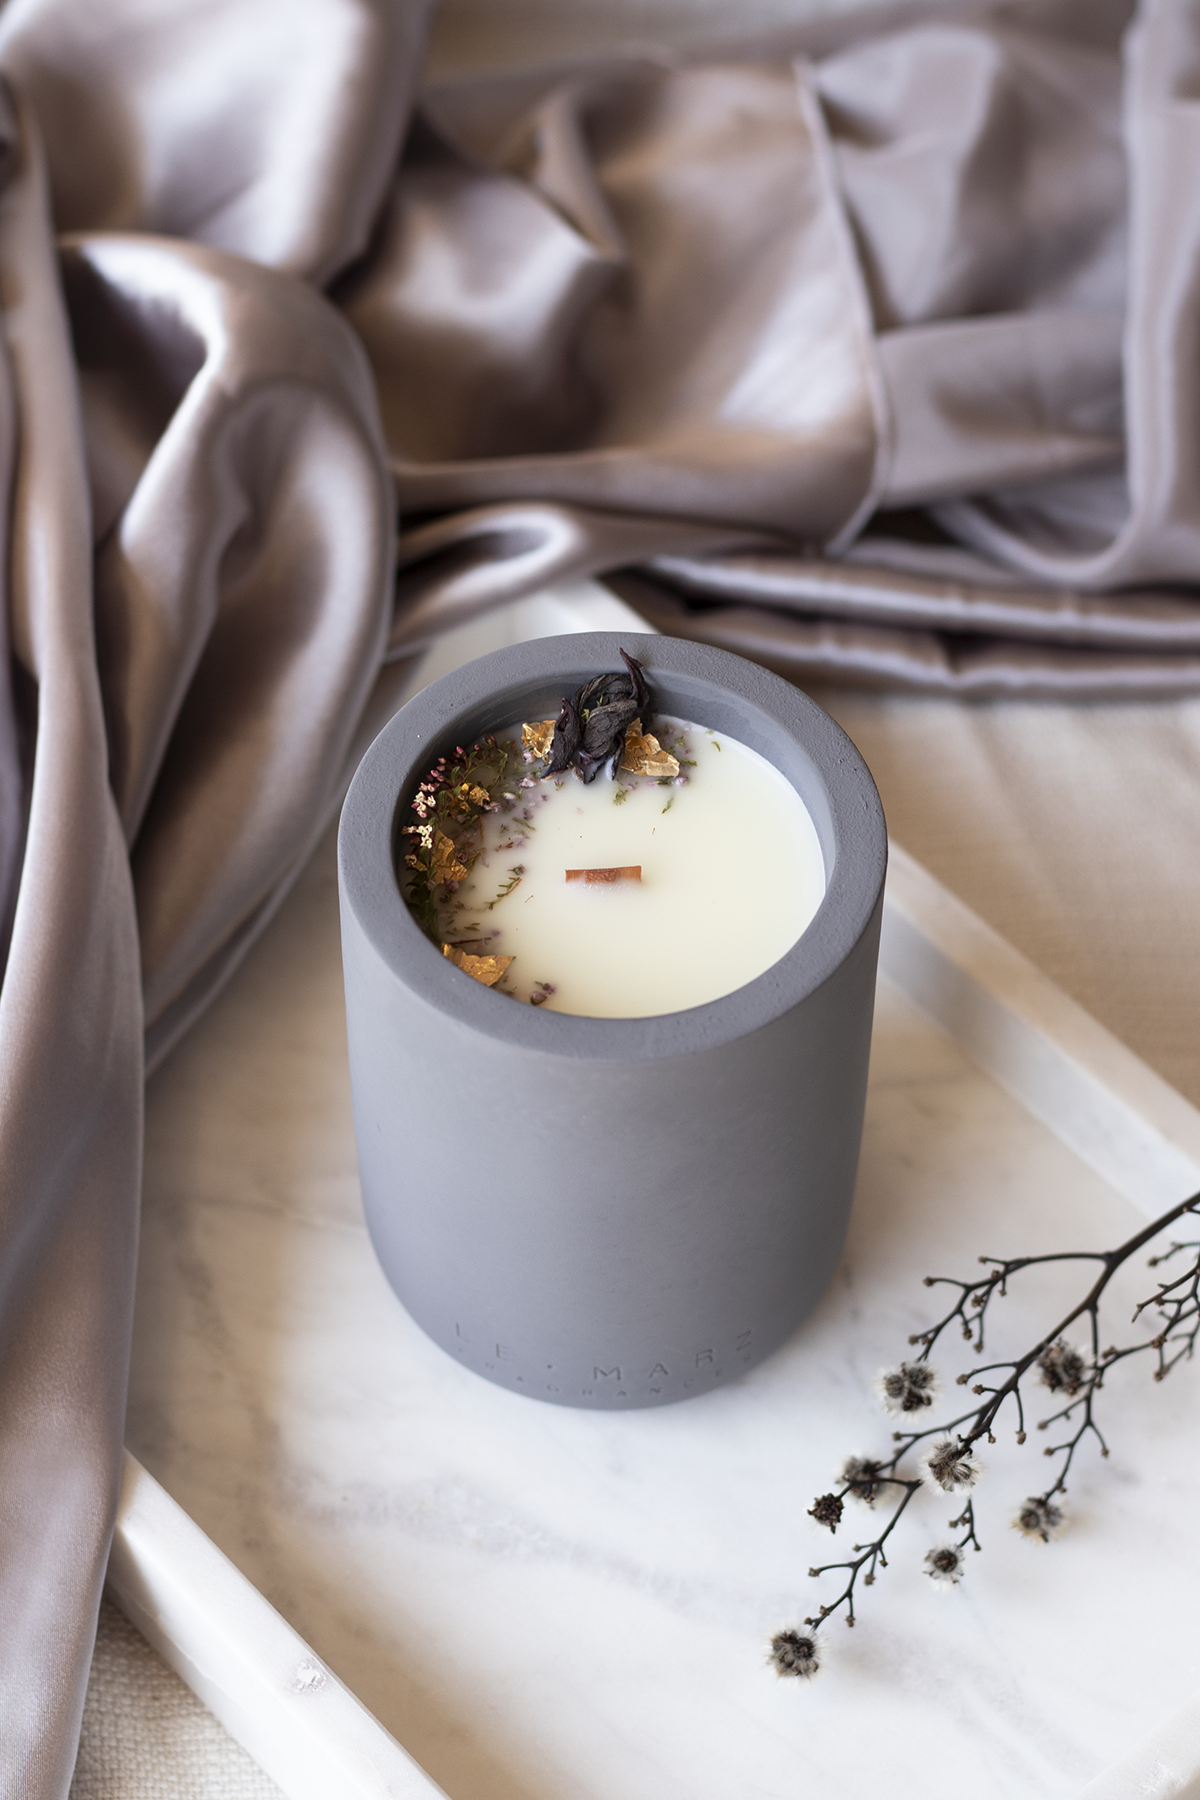 Japanese Honeysuckle candle, wood wick, gift ideas, concrete candles, house warming gift, luxury candles, pretty candles, wood wick candle, candles, grey concrete candle